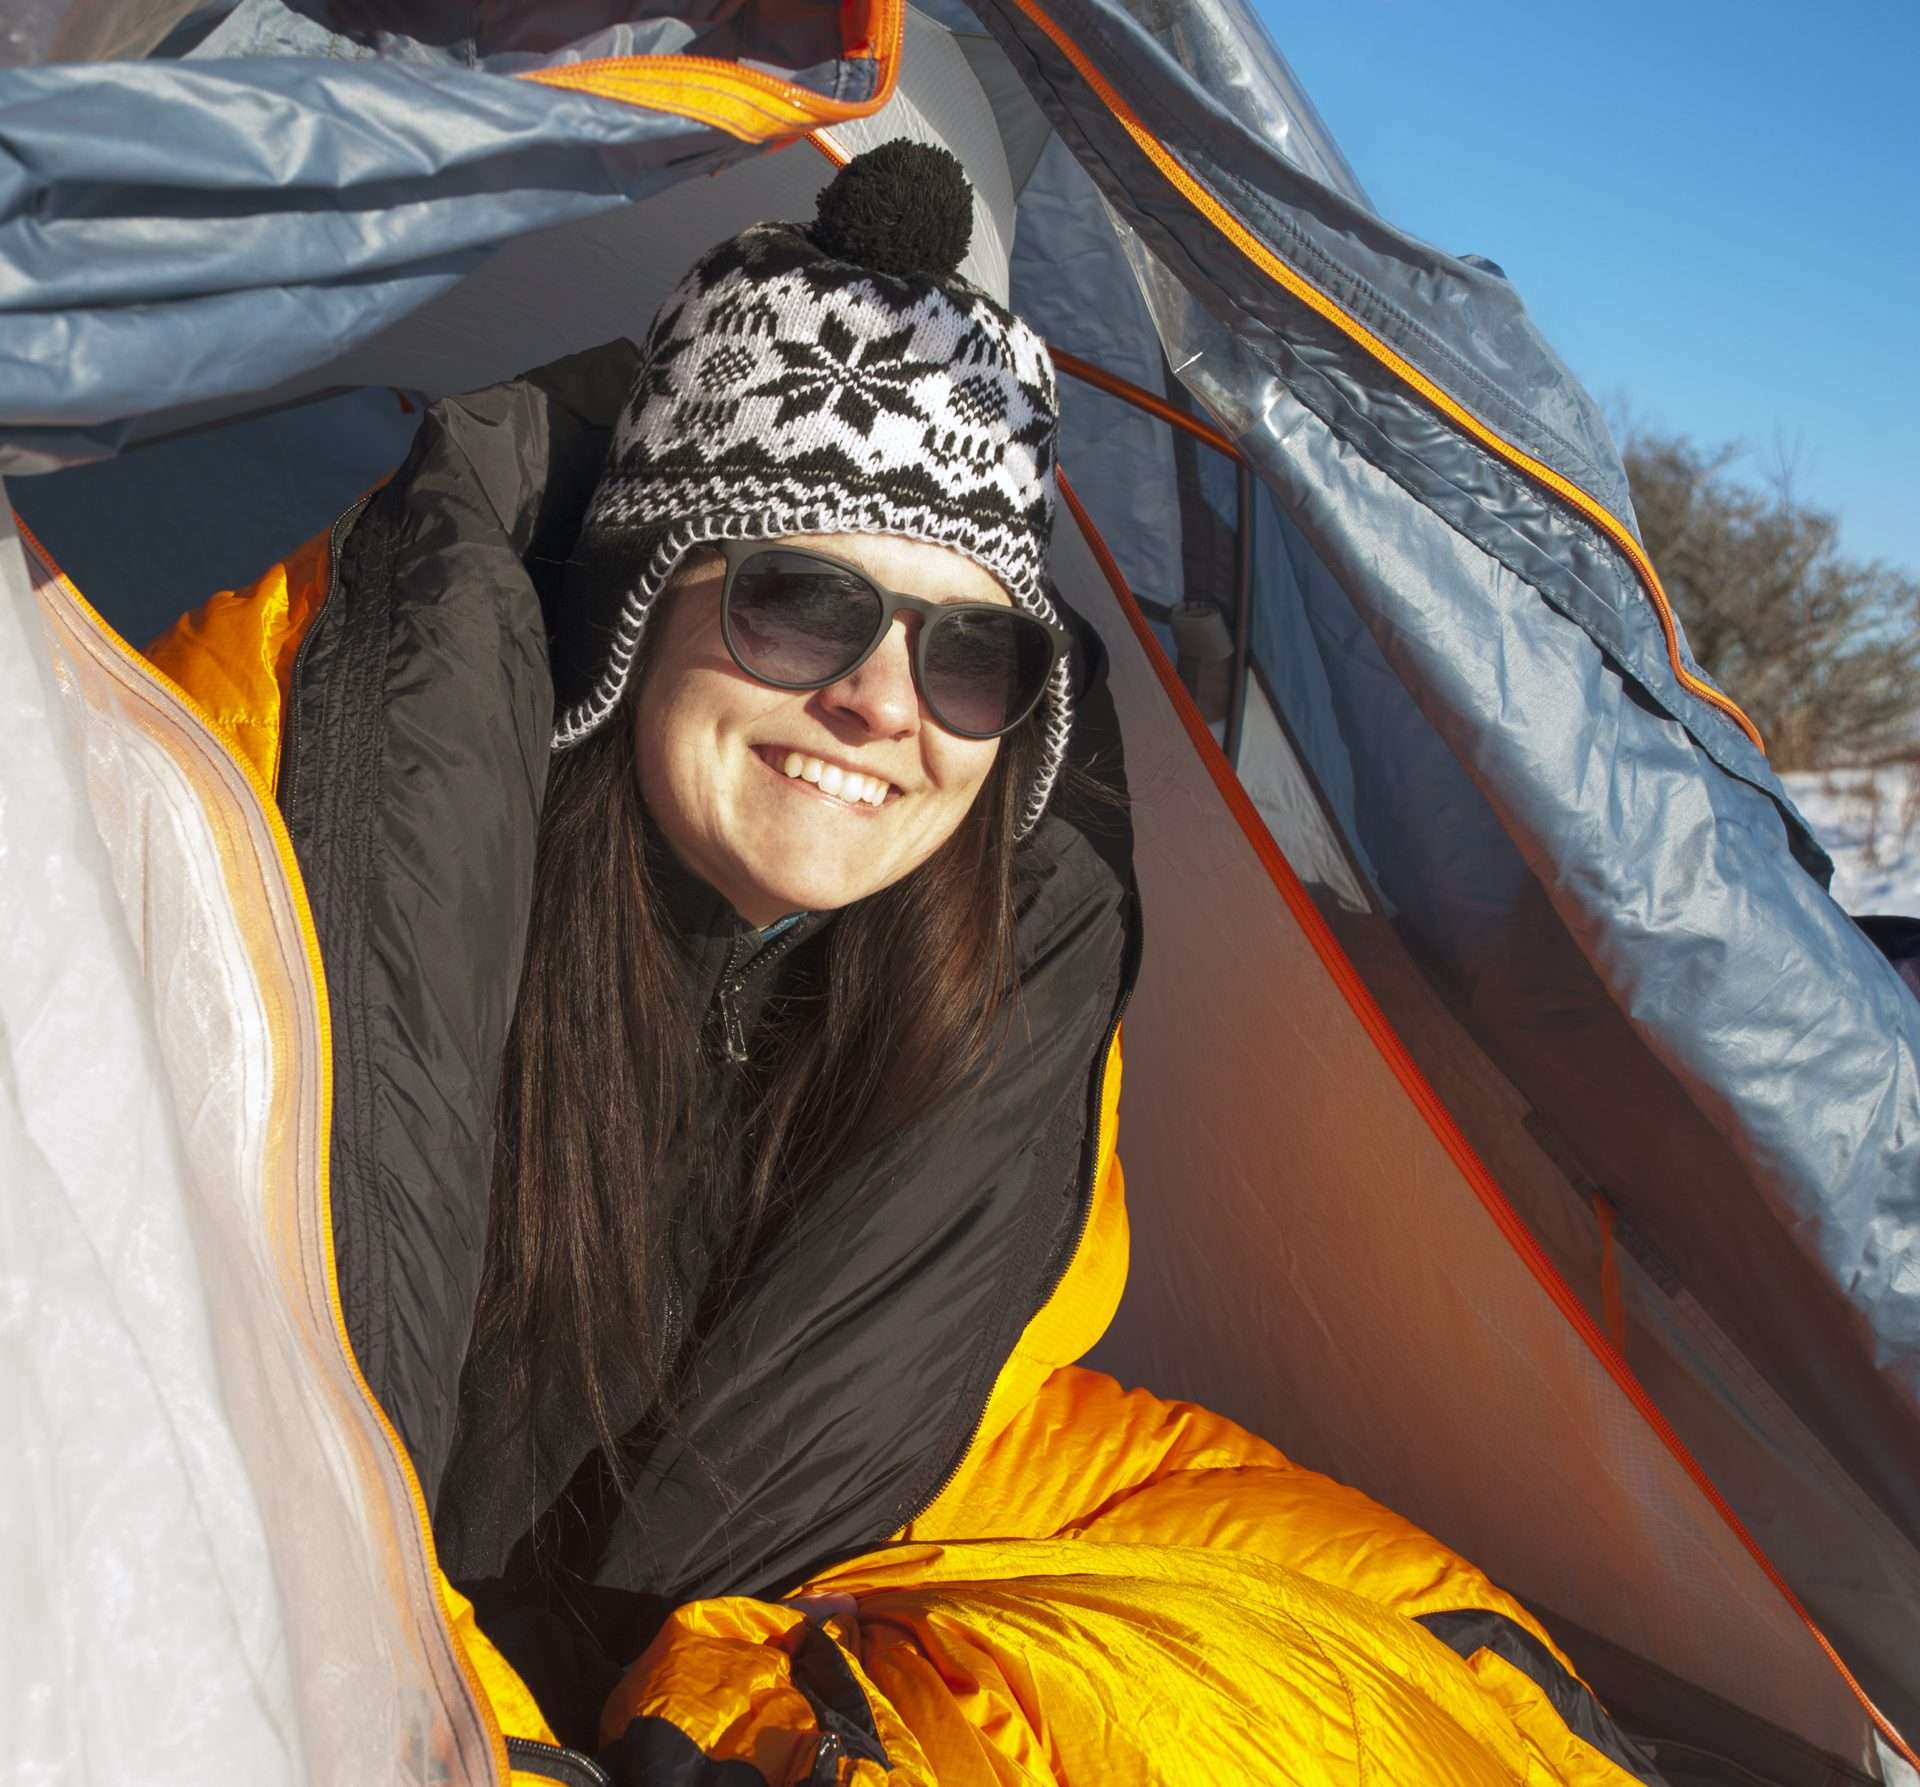 Woman looking out of tent flap smiling wearing winter hat.